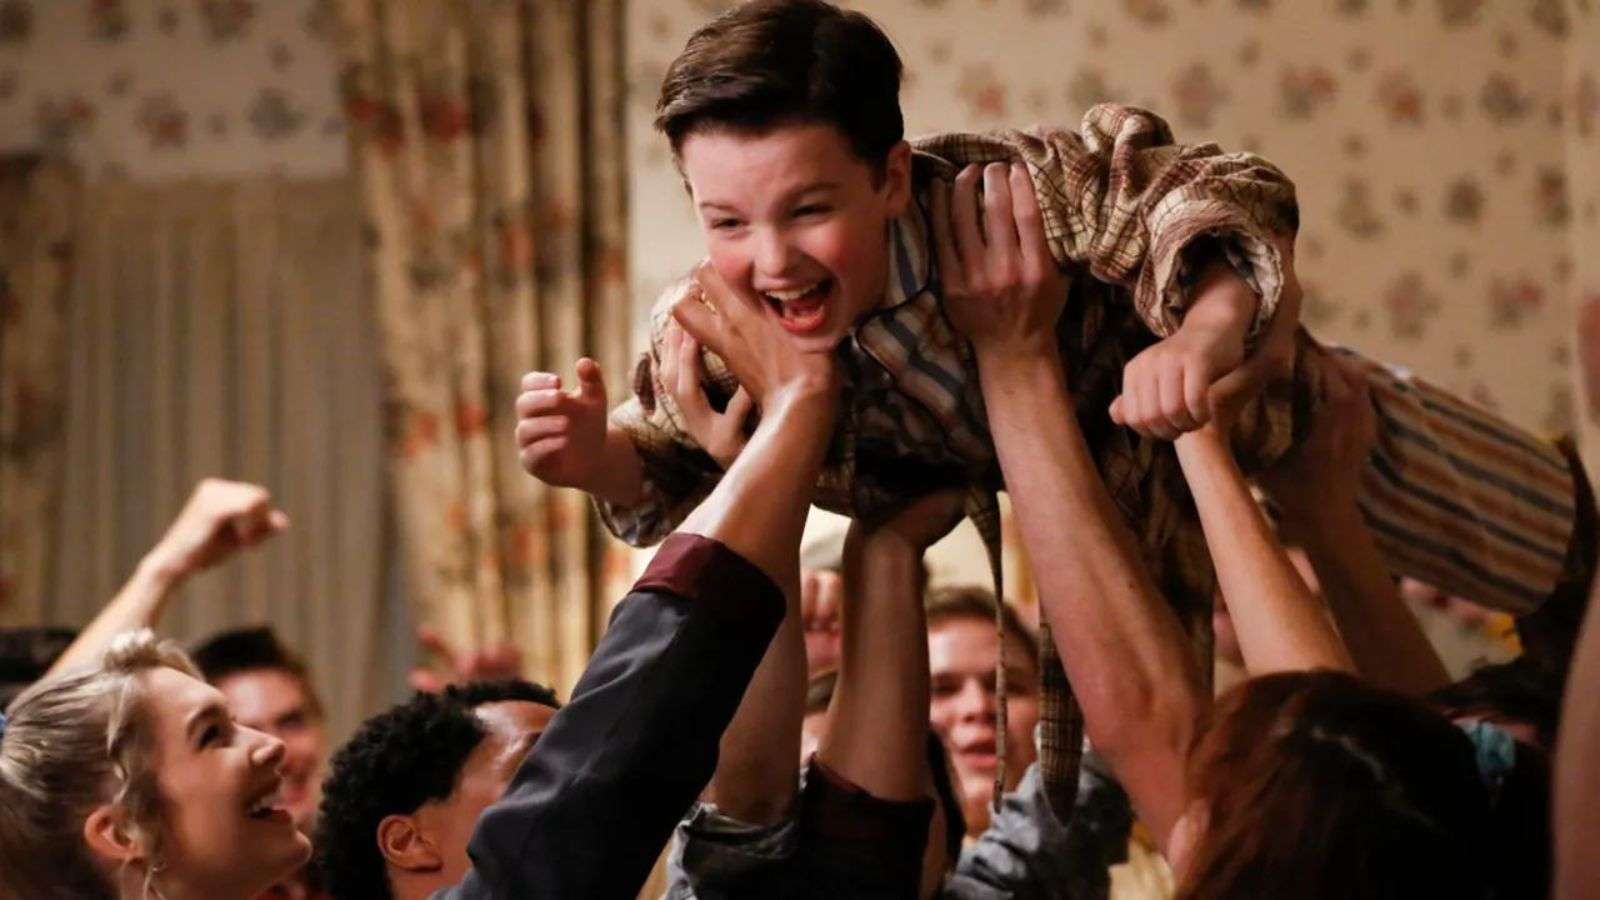 Sheldon being carried by a group of kids in Young Sheldon